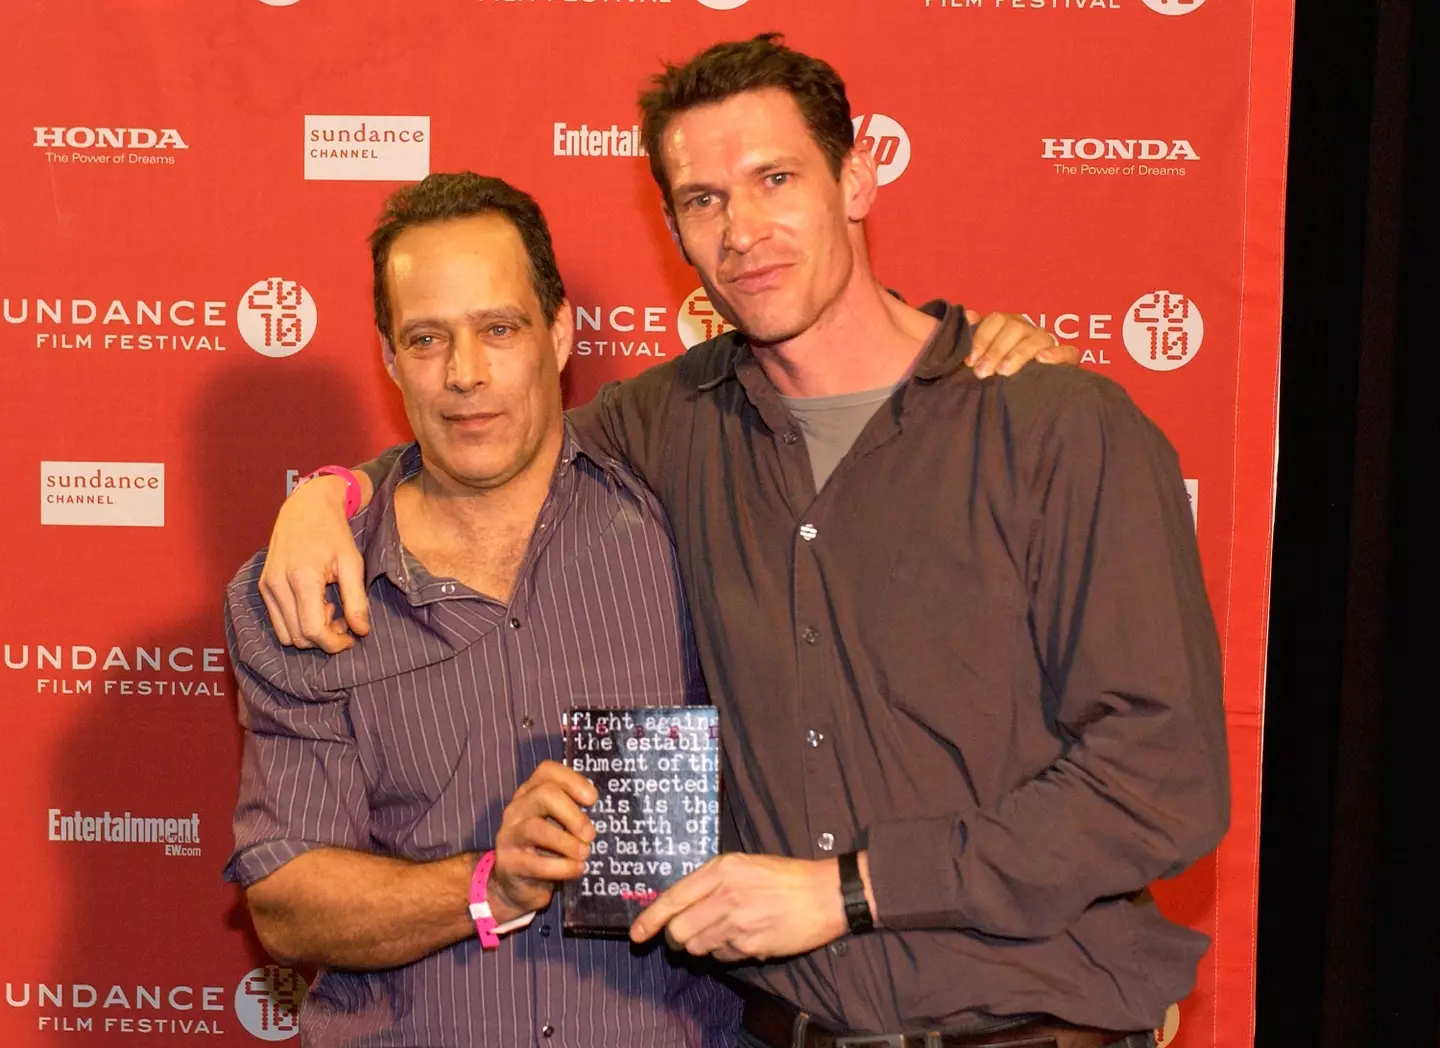 The documentary was created by Sebastian Junger and Tim Hetherington, who were embedded with the soldiers in the valley.